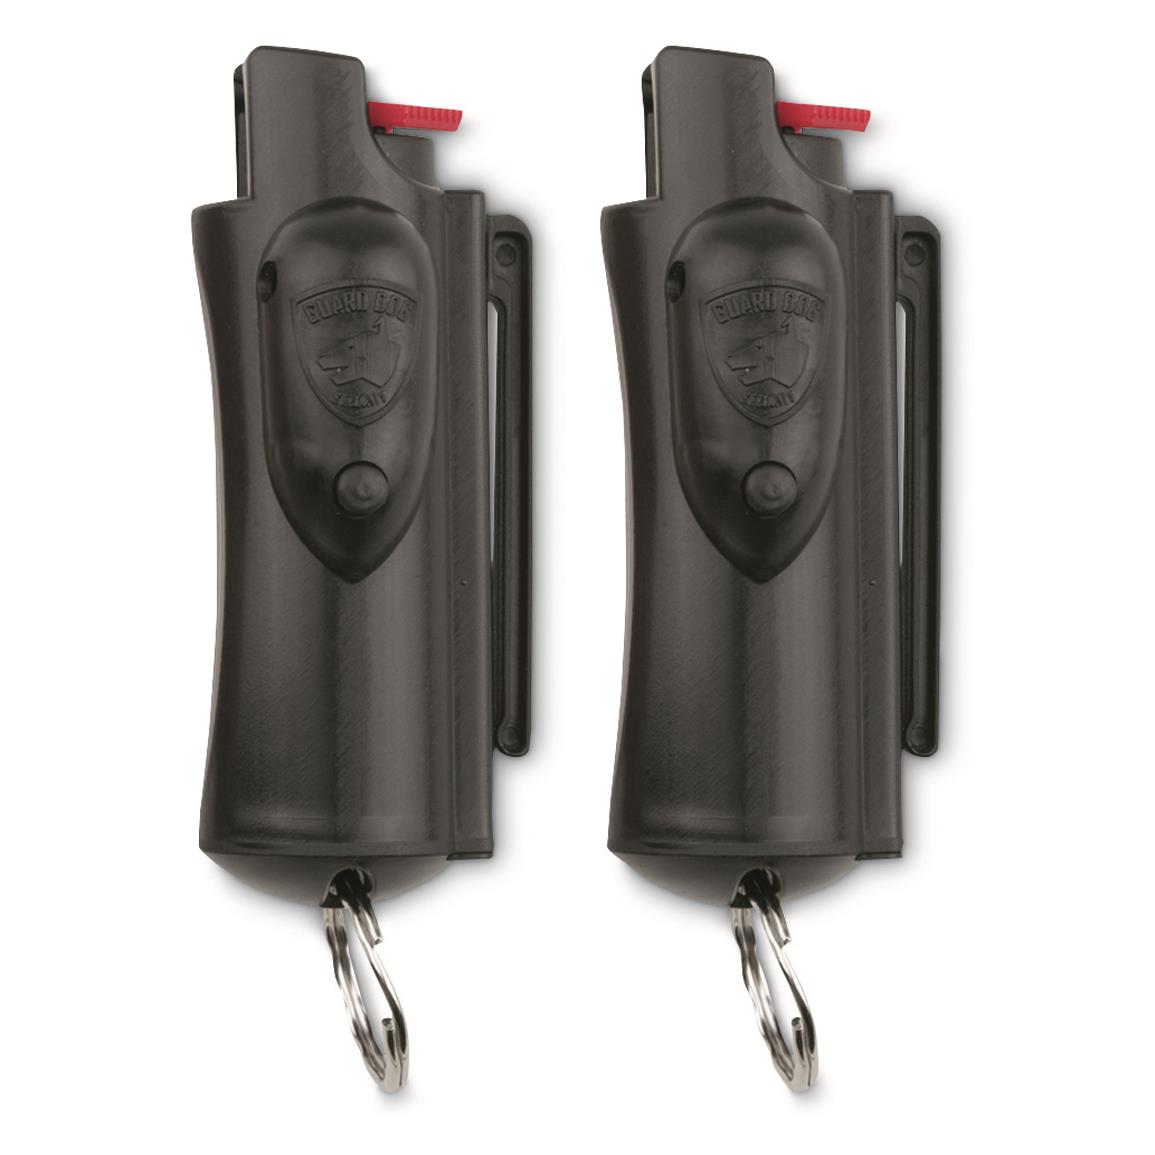 Guard Dog Security AccuFire Pepper Spray with Laser Sight, 2 Pack, Black